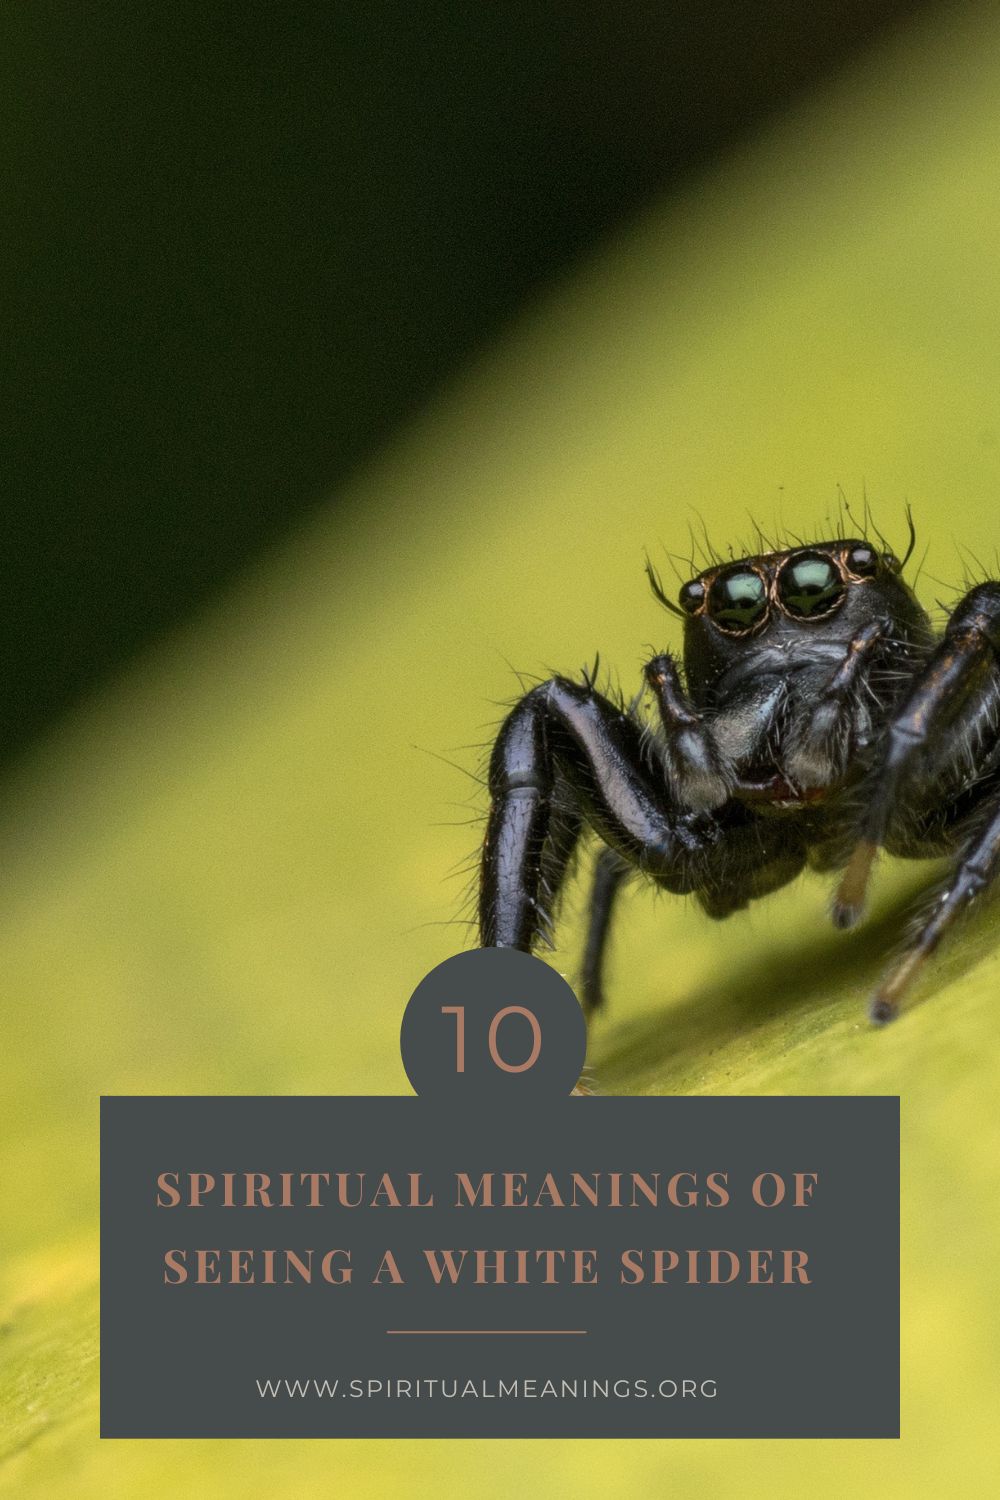 Spiritual Meanings of Spiders by Their Color